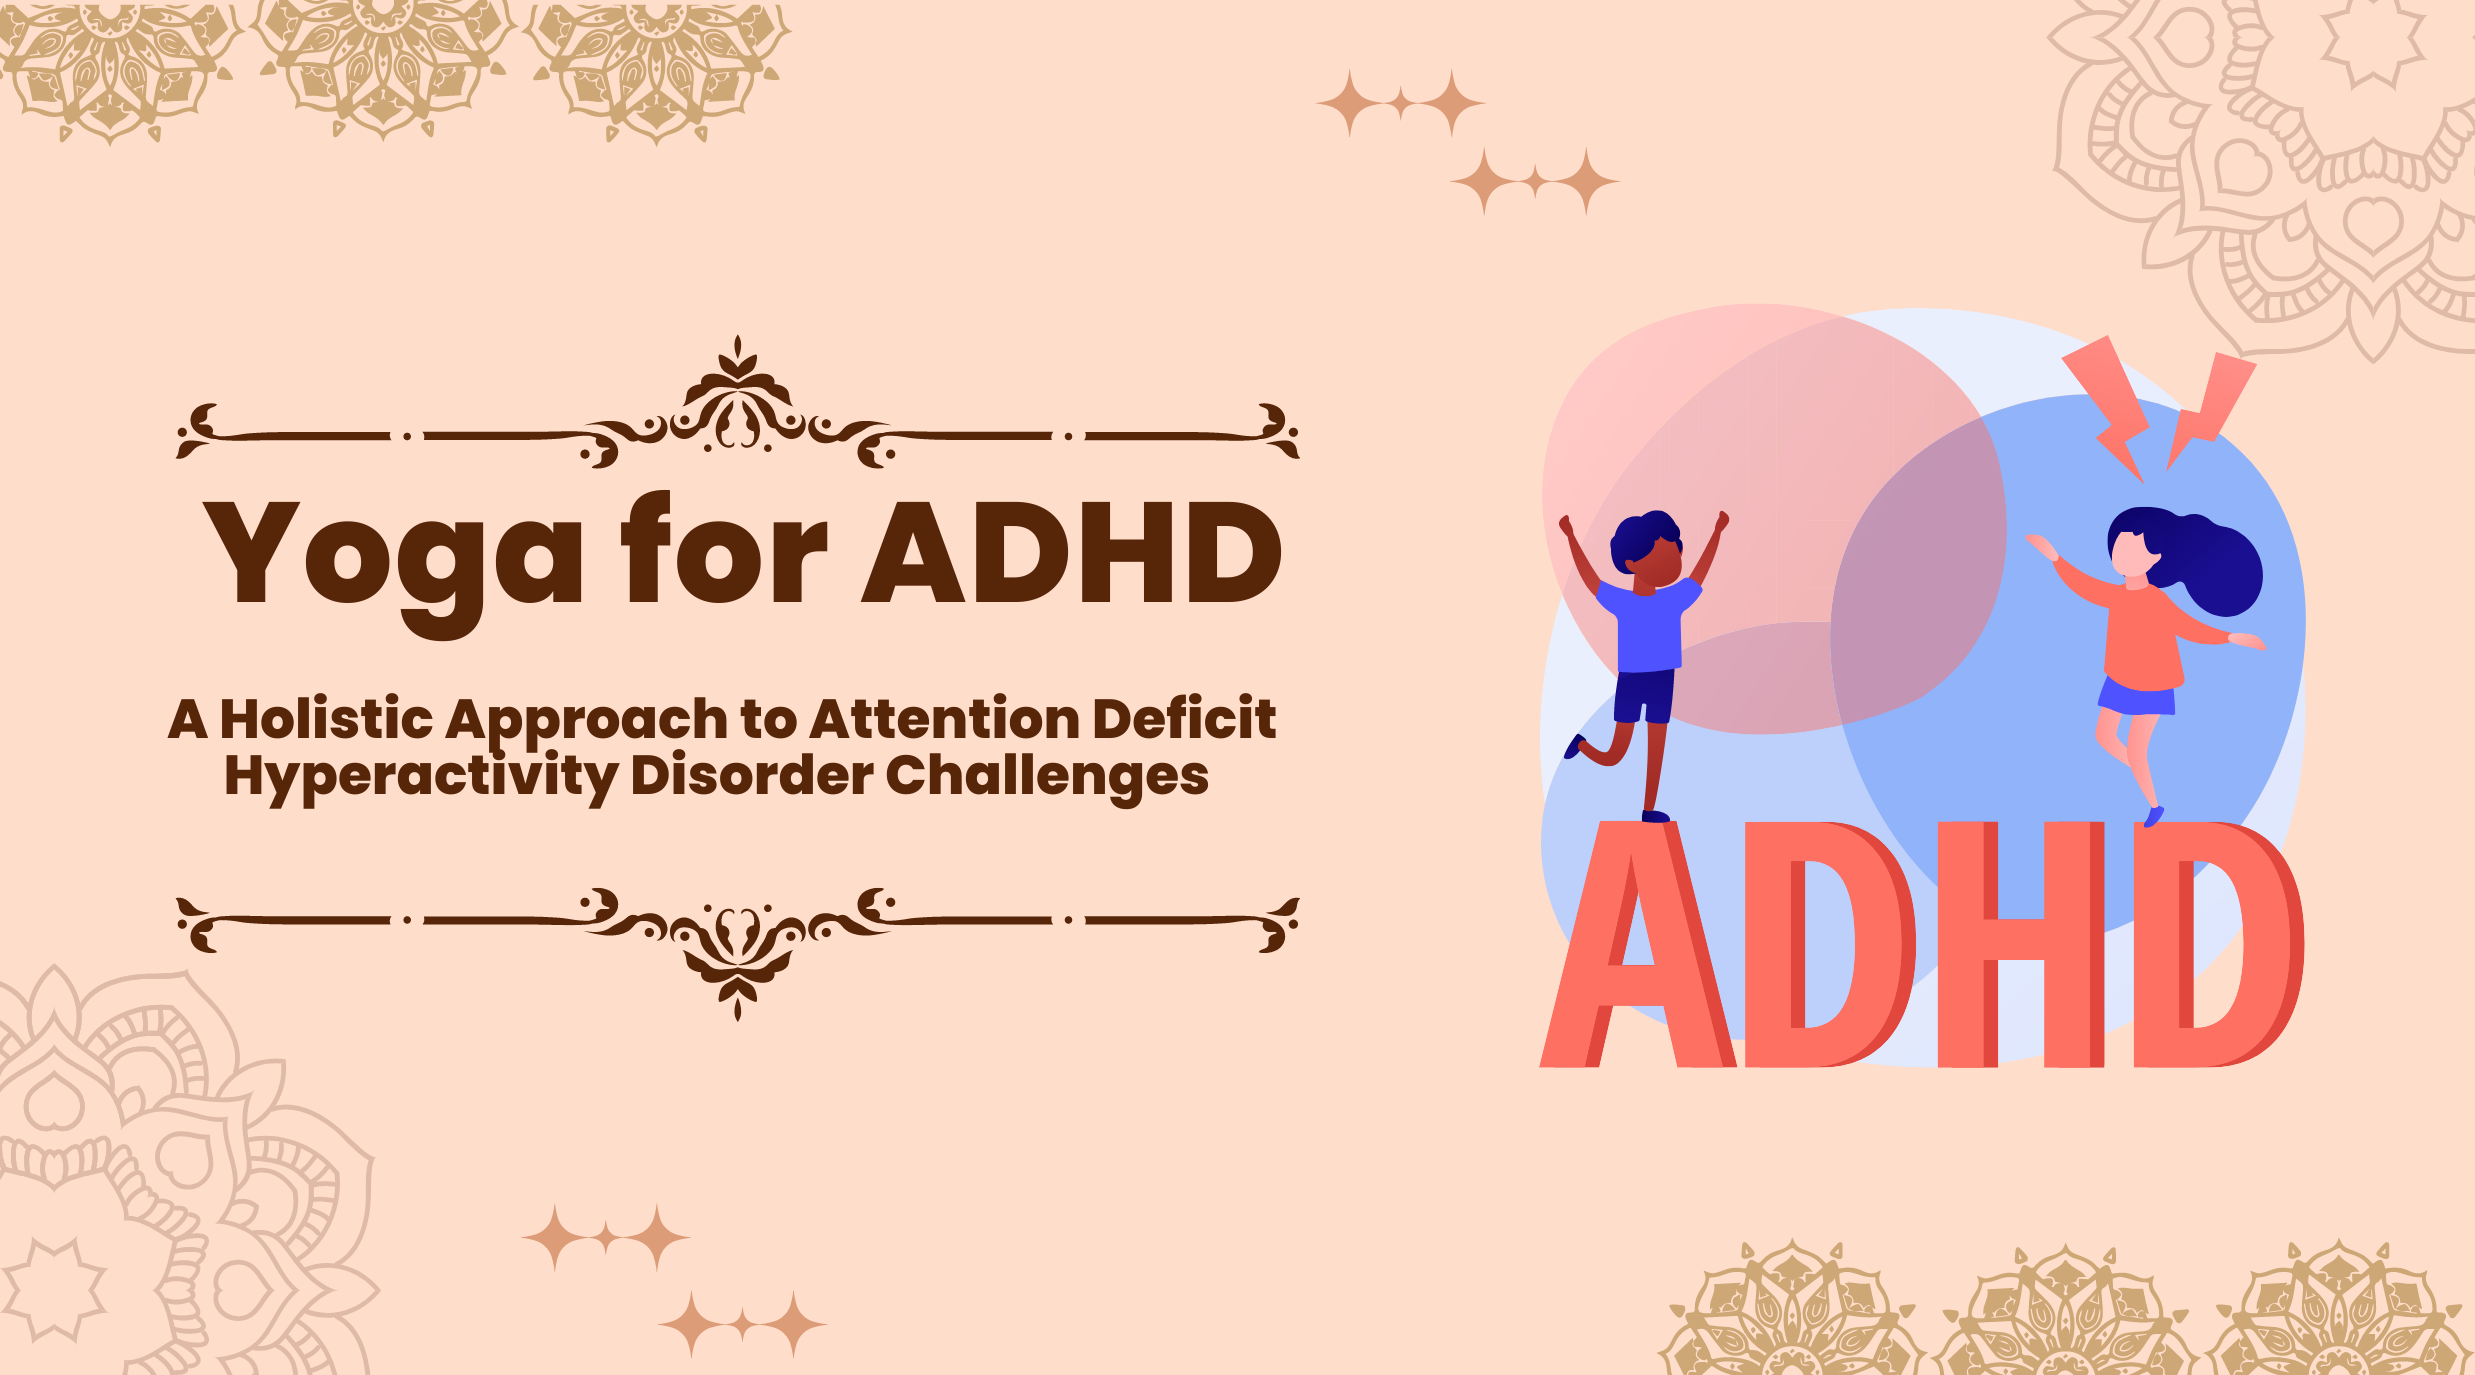 Yoga for Attention Deficit Hyperactivity Disorder: A Holistic Approach to ADHD Challenges